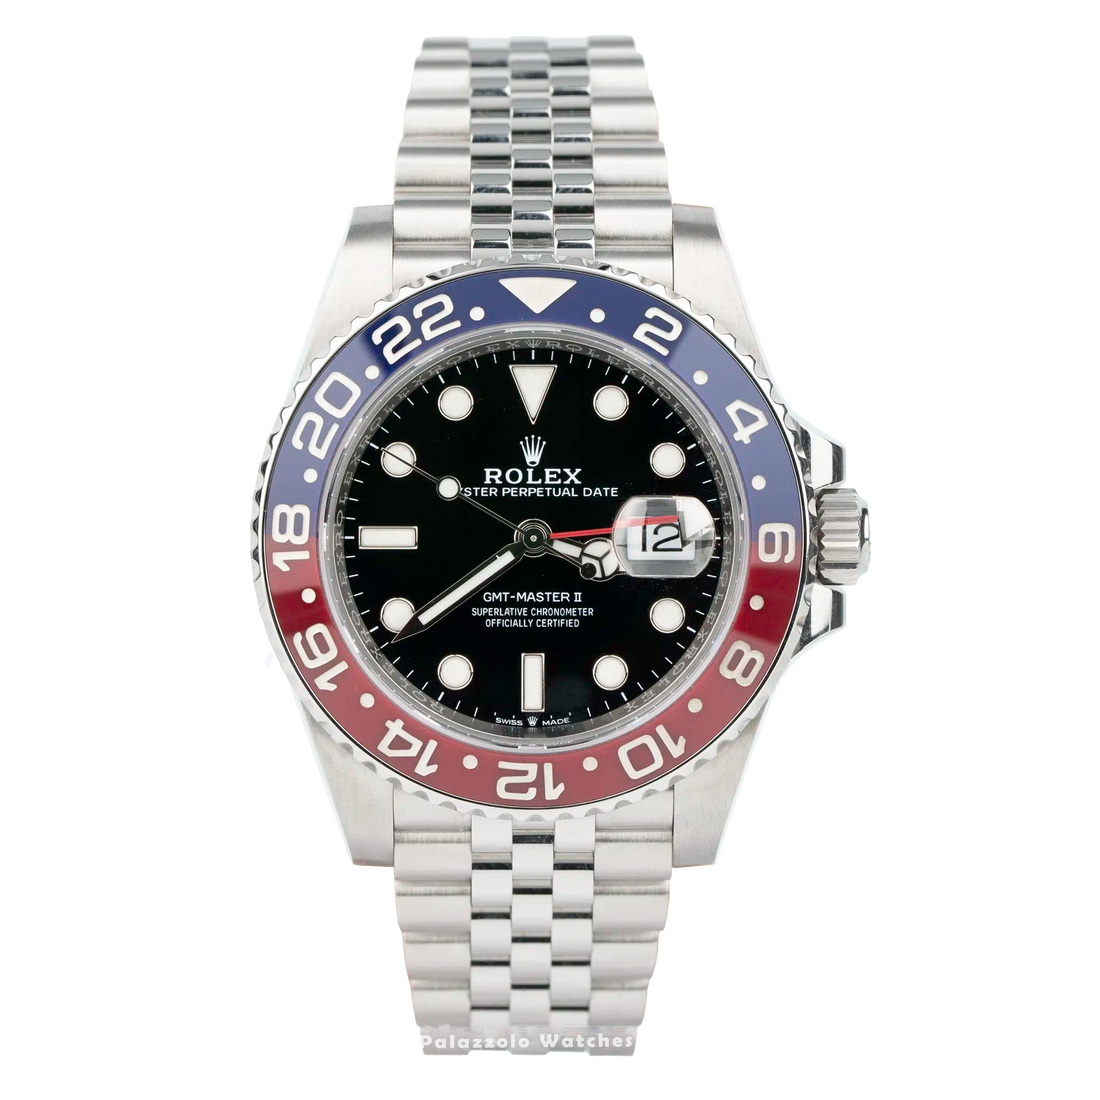 Rolex GMT-Master II Pepsi with Jubilee Bracelet - Palazzolo Watches